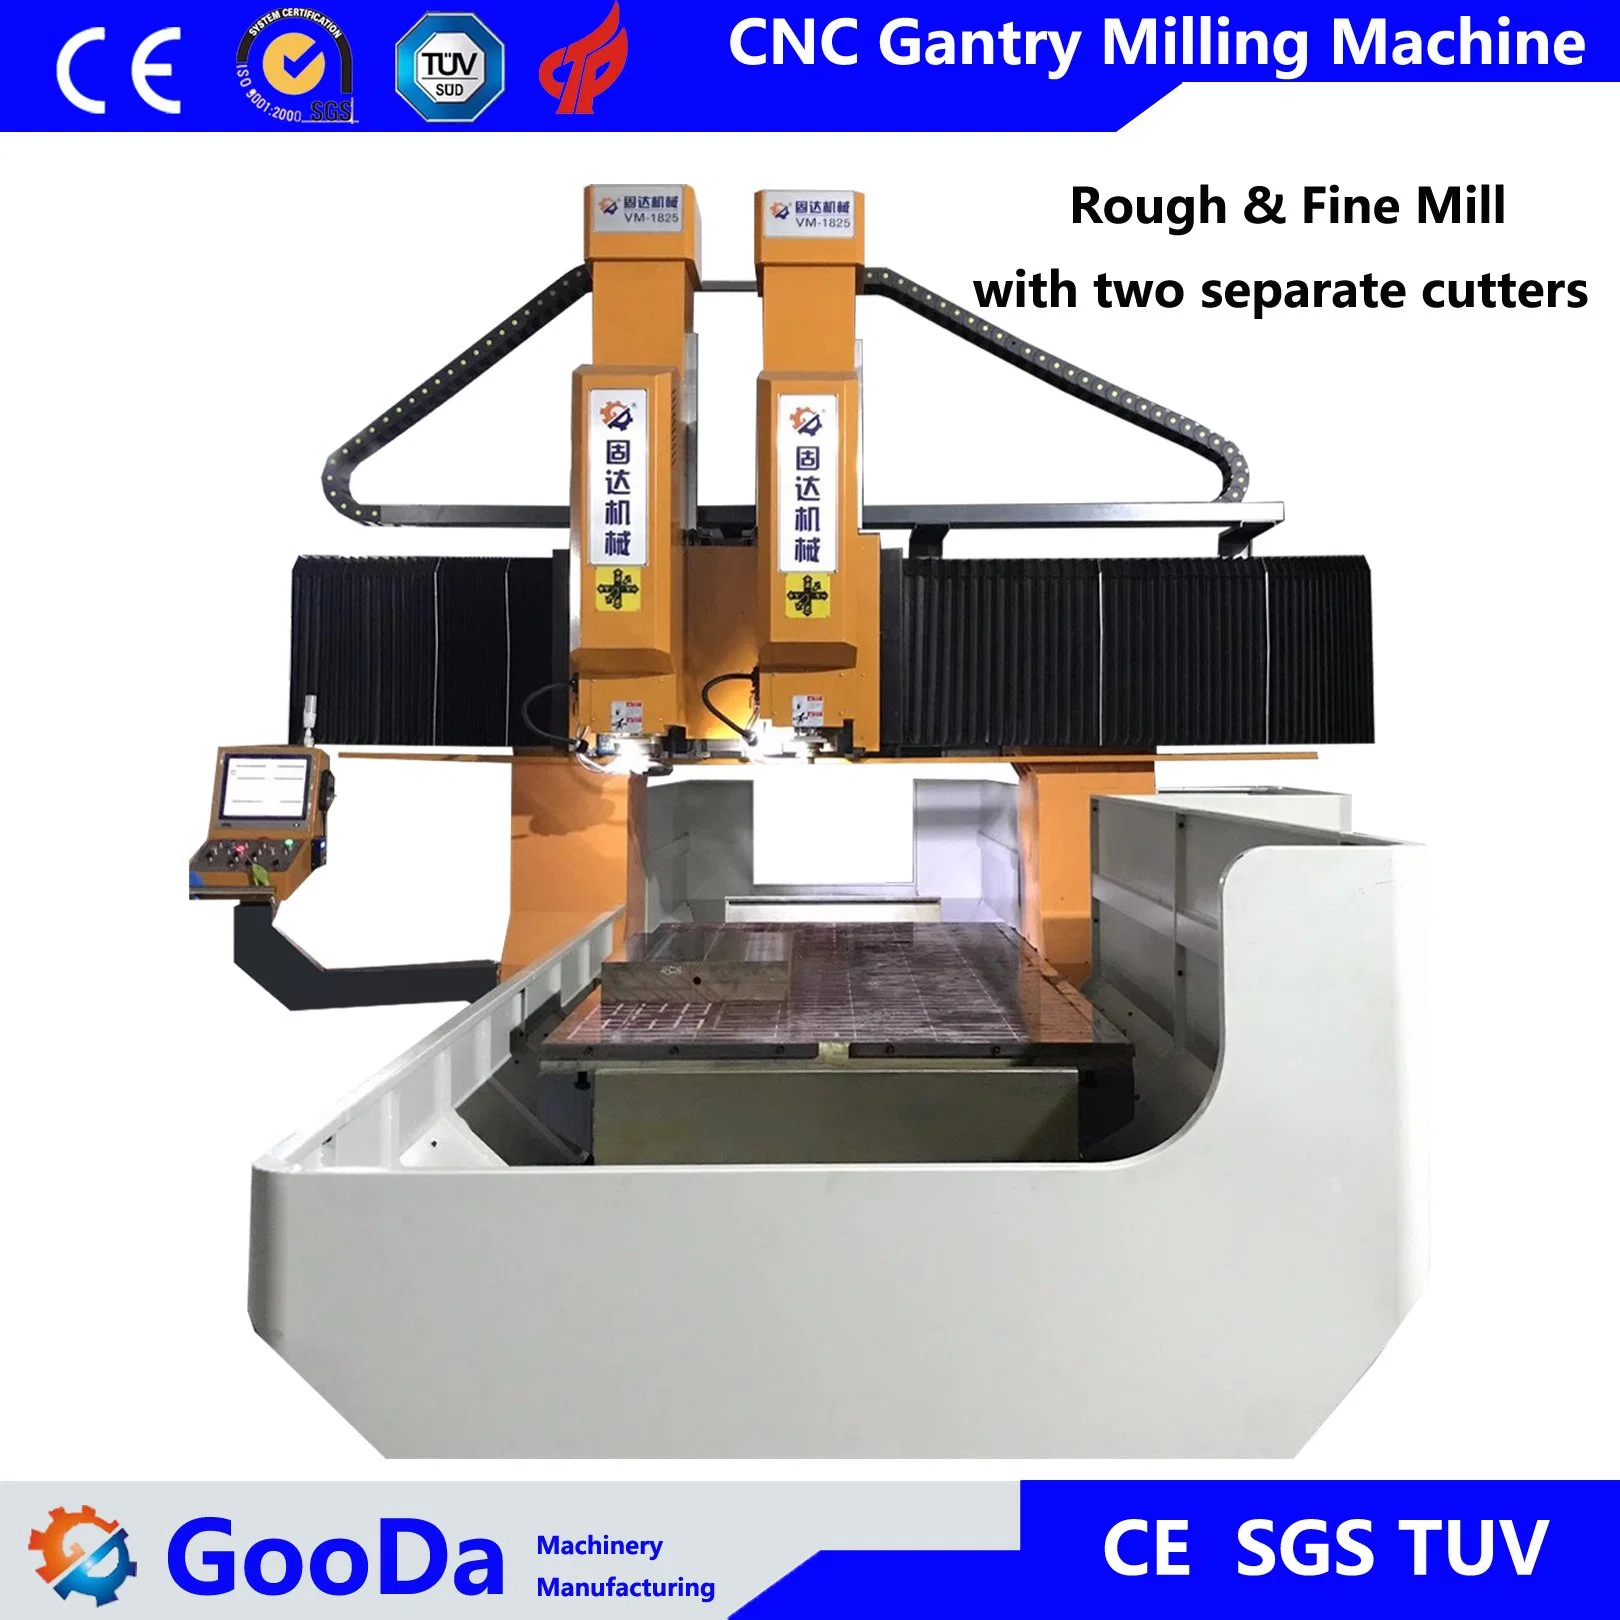 Gooda CNC Machine Tool Gantry Milling with Two Separate Rough and Fine Cutting Drilling Grinding Planar Type Machinery